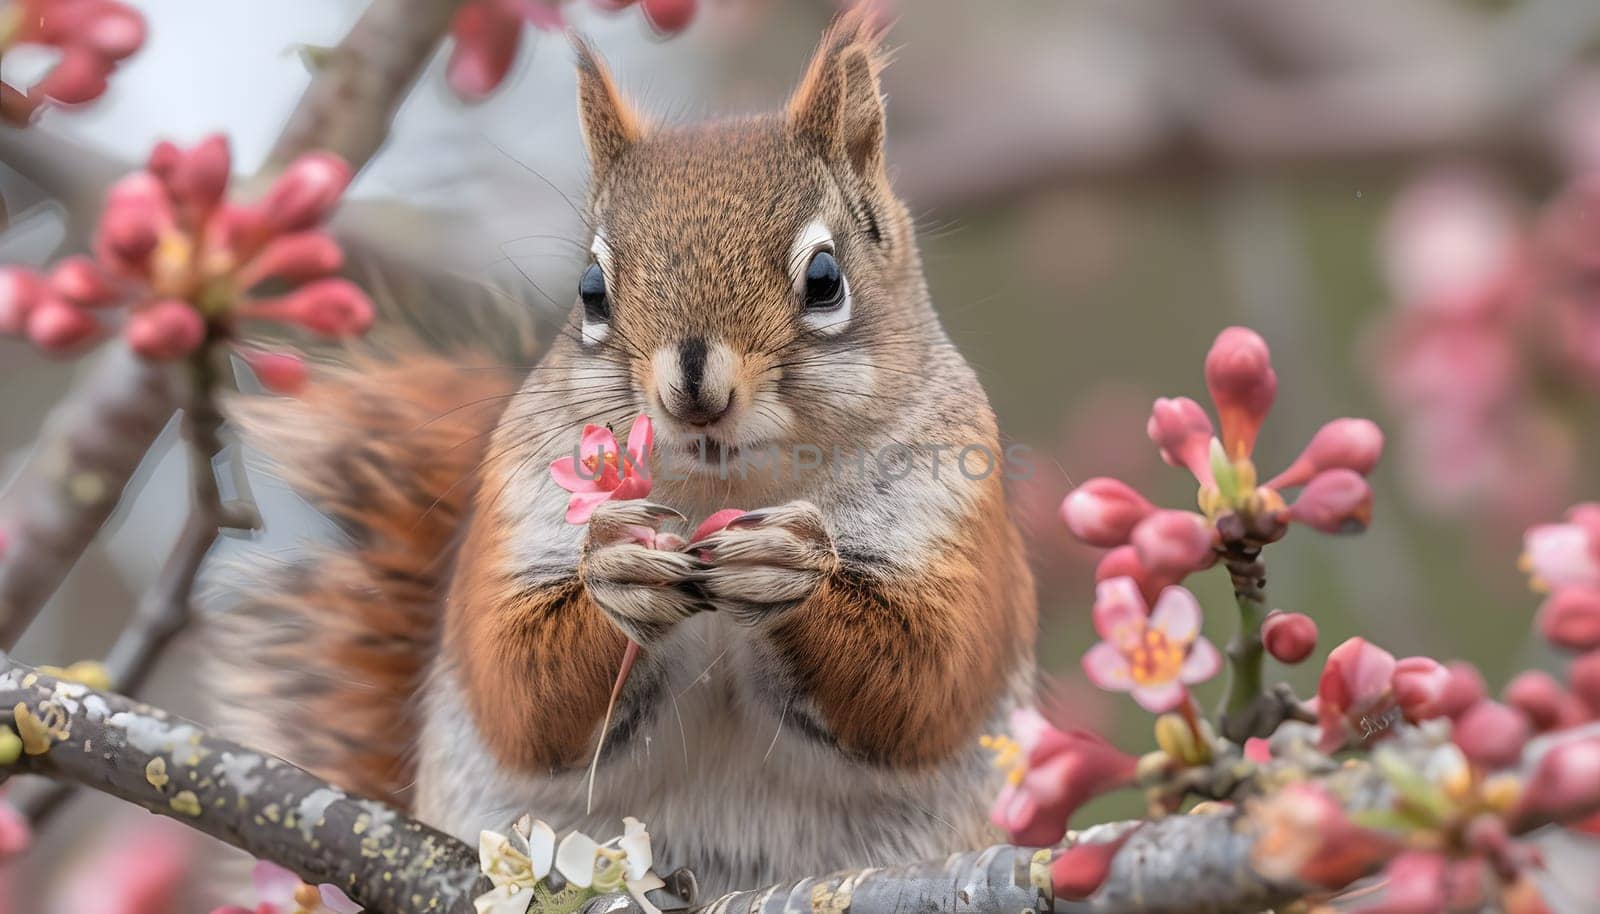 A rodent with whiskers known as a squirrel is perched on a tree branch, nibbling on flower petals. This terrestrial animal has a snout and enjoys feasting on plant organisms